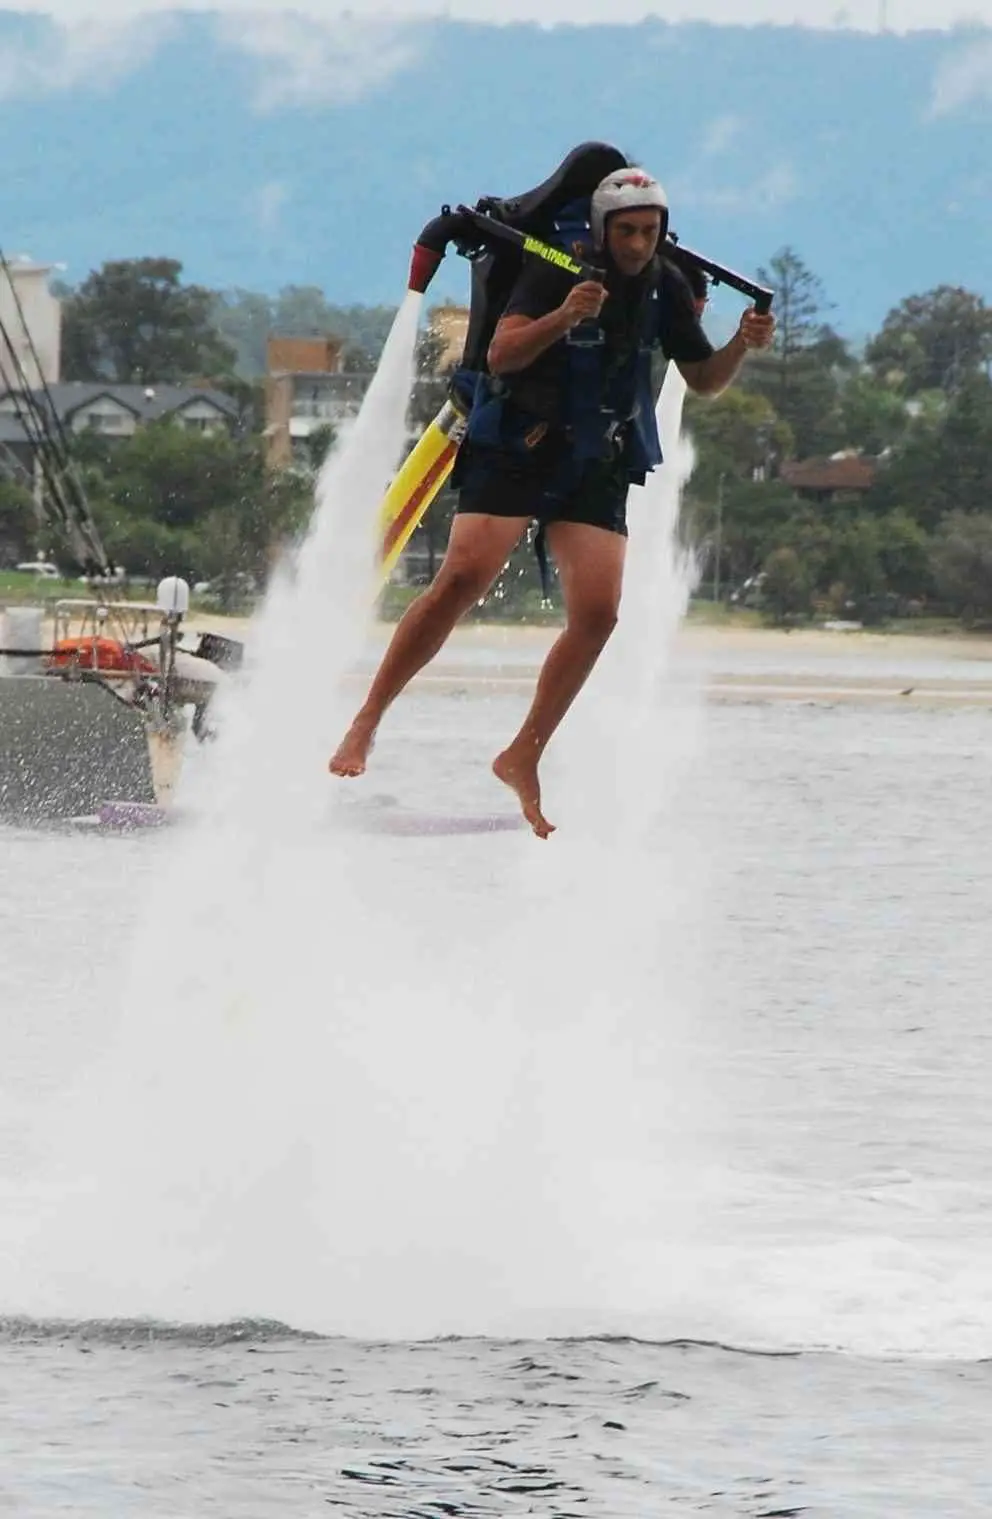 Water Jets E1520767374846 | Australia Travel Blog | How To Ride A Jet Pack And Flyboard On Water. Looking Like A Complete Goose, Thanks To Tripadvisor Attractions! | Australia, Flyboarding, Gold Coast, Jet Pack Water, Things To Do, Tripadvisor | Author: Anthony Bianco - The Travel Tart Blog